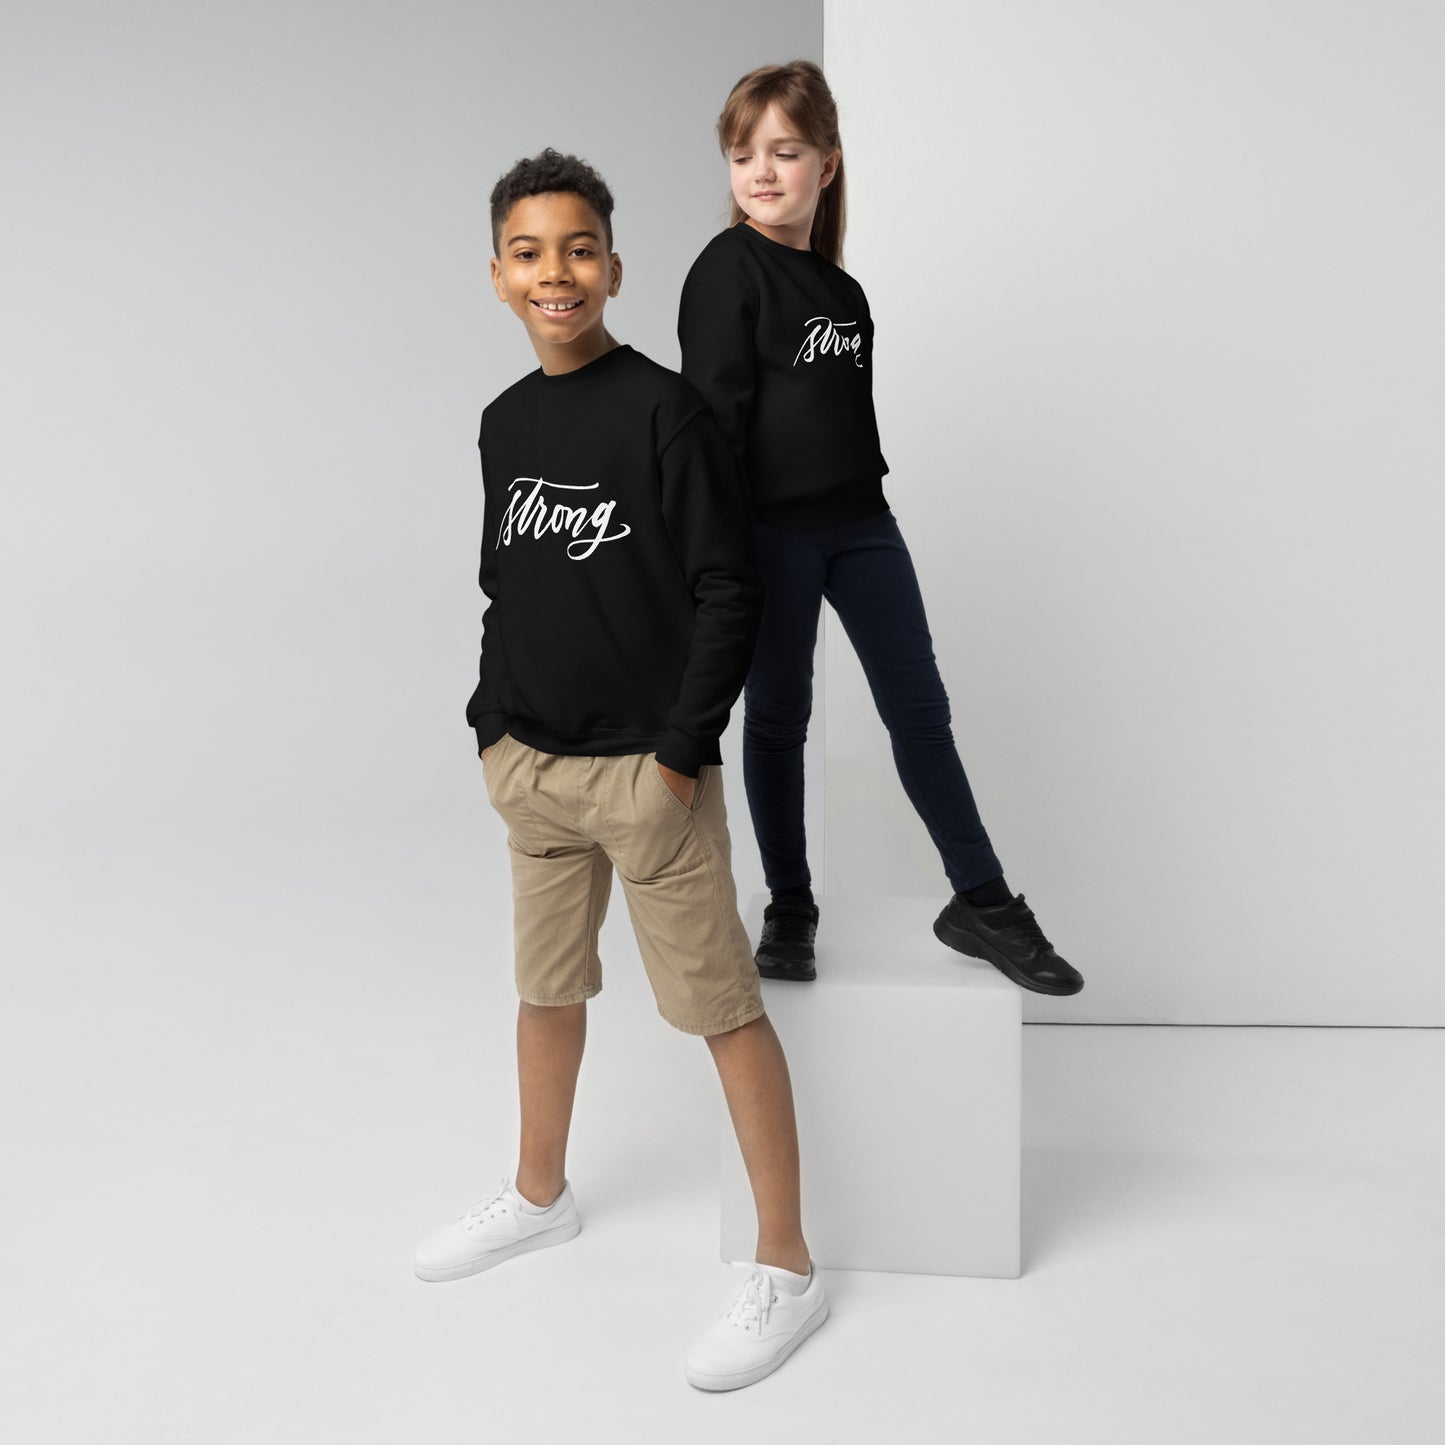 White Script "Strong" Calligraphy Printed on Kids' Crewneck Sweatshirt (Youth Sizes)